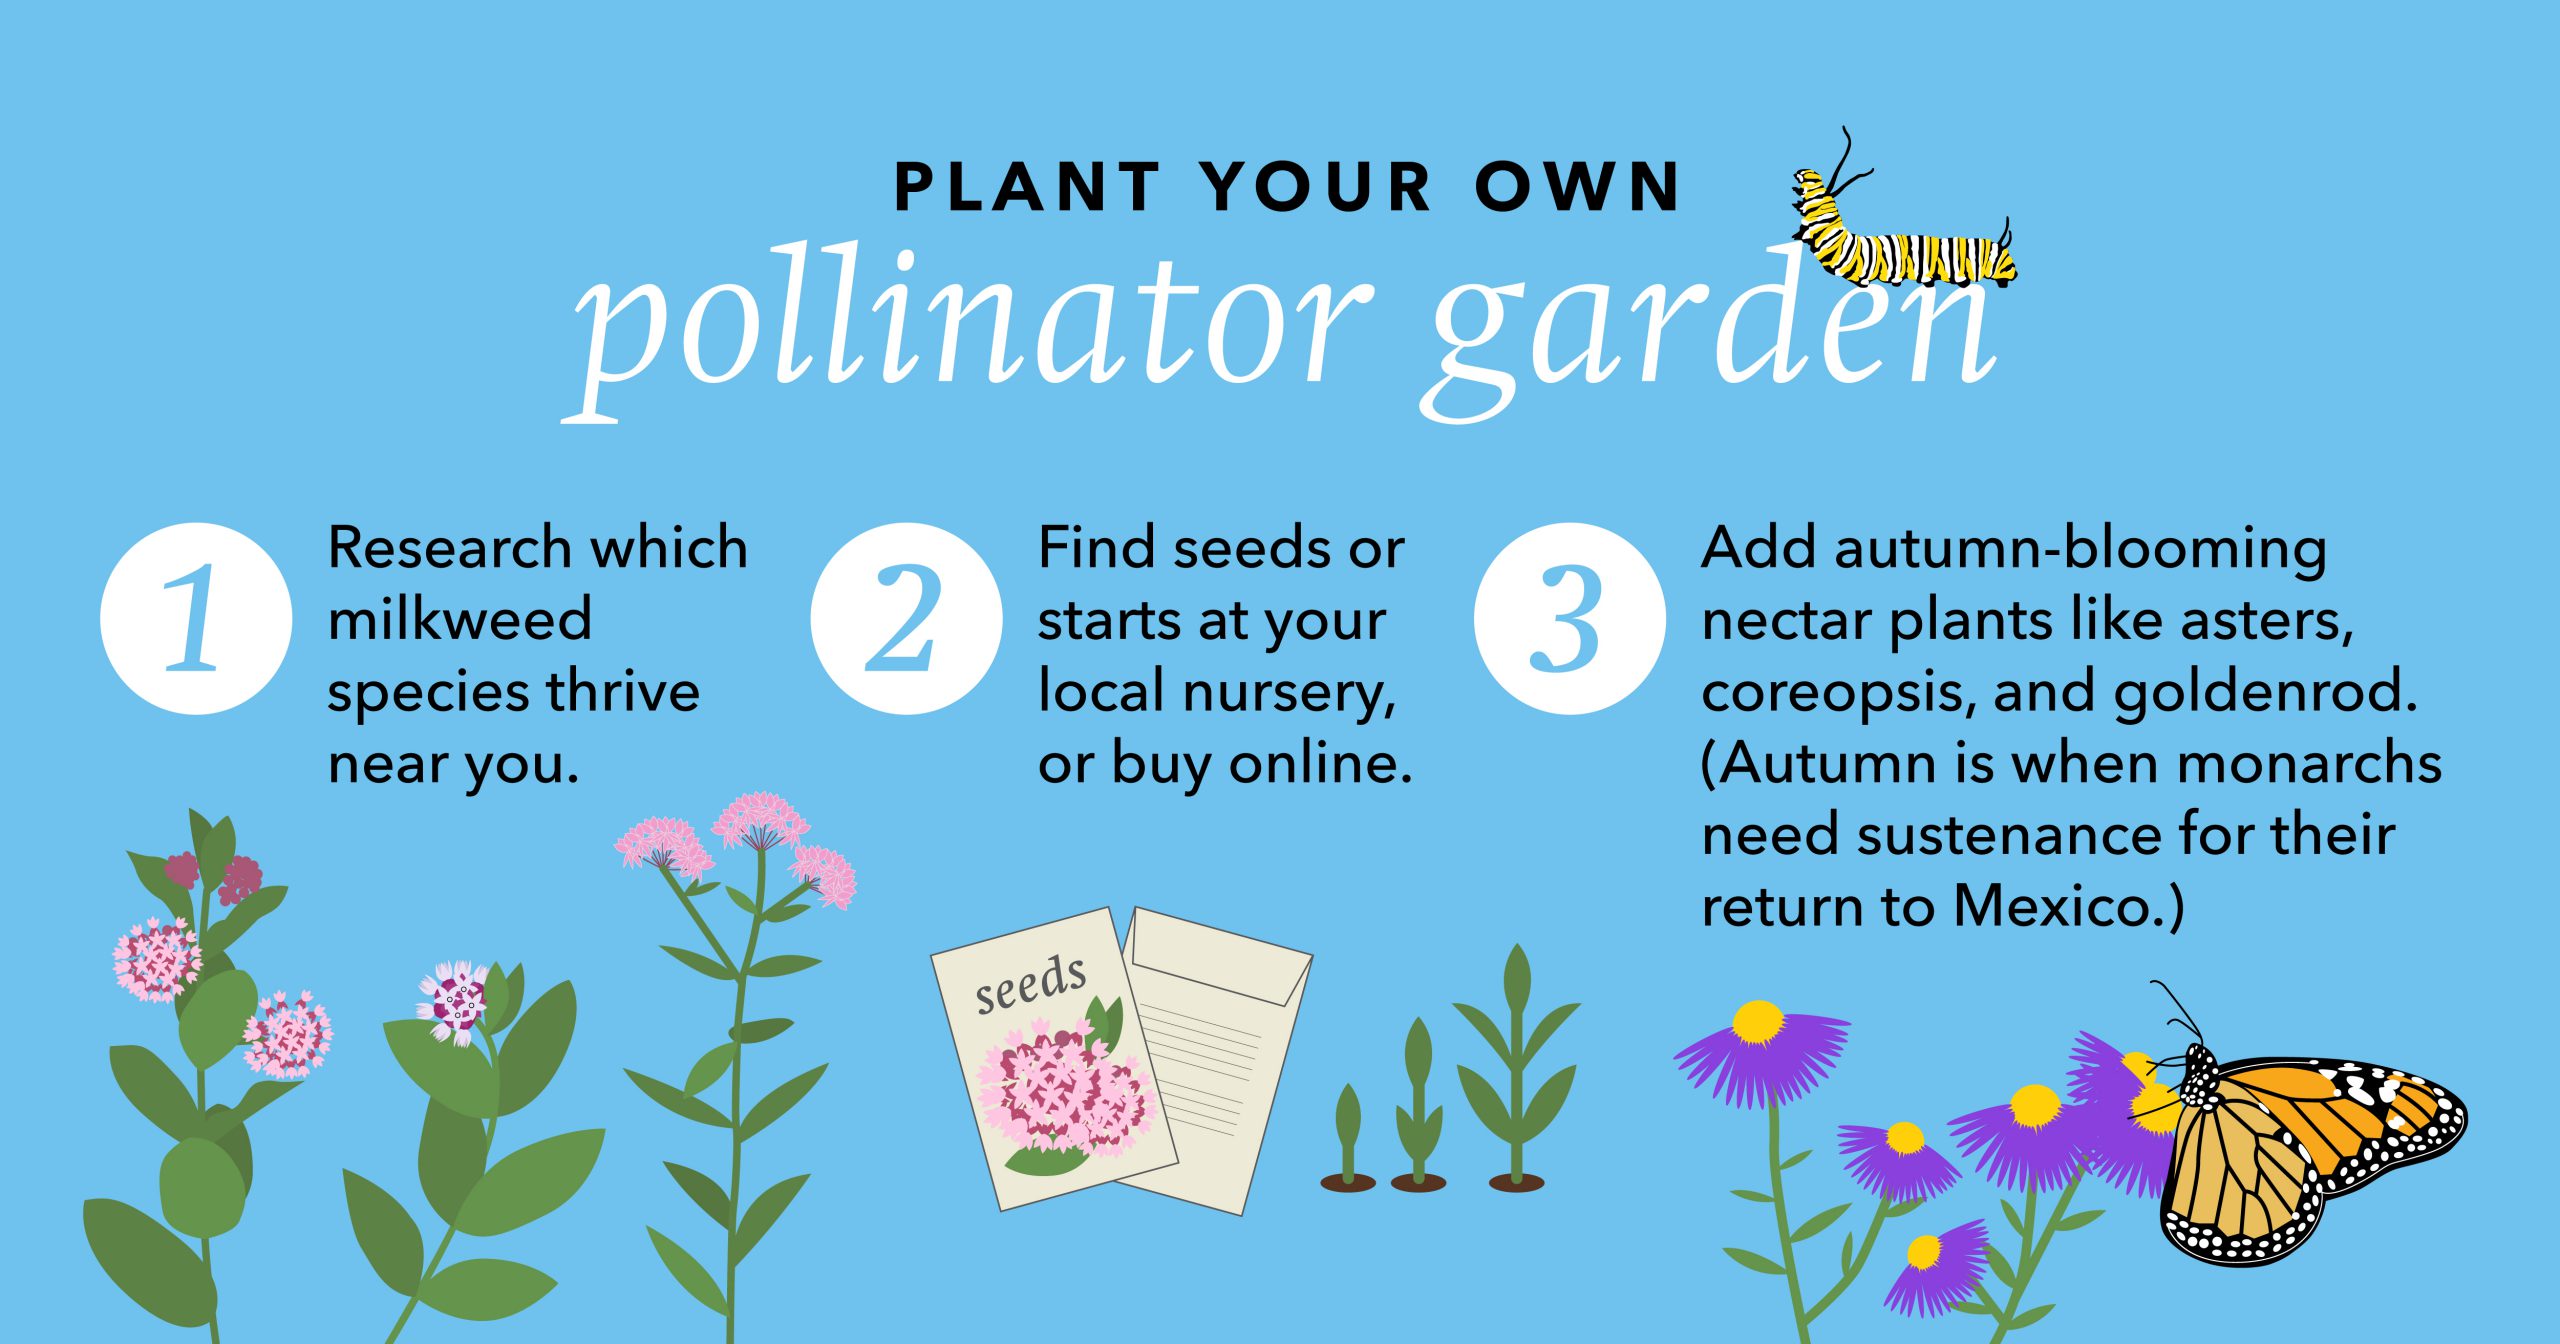 Information about planting a garden for pollinators